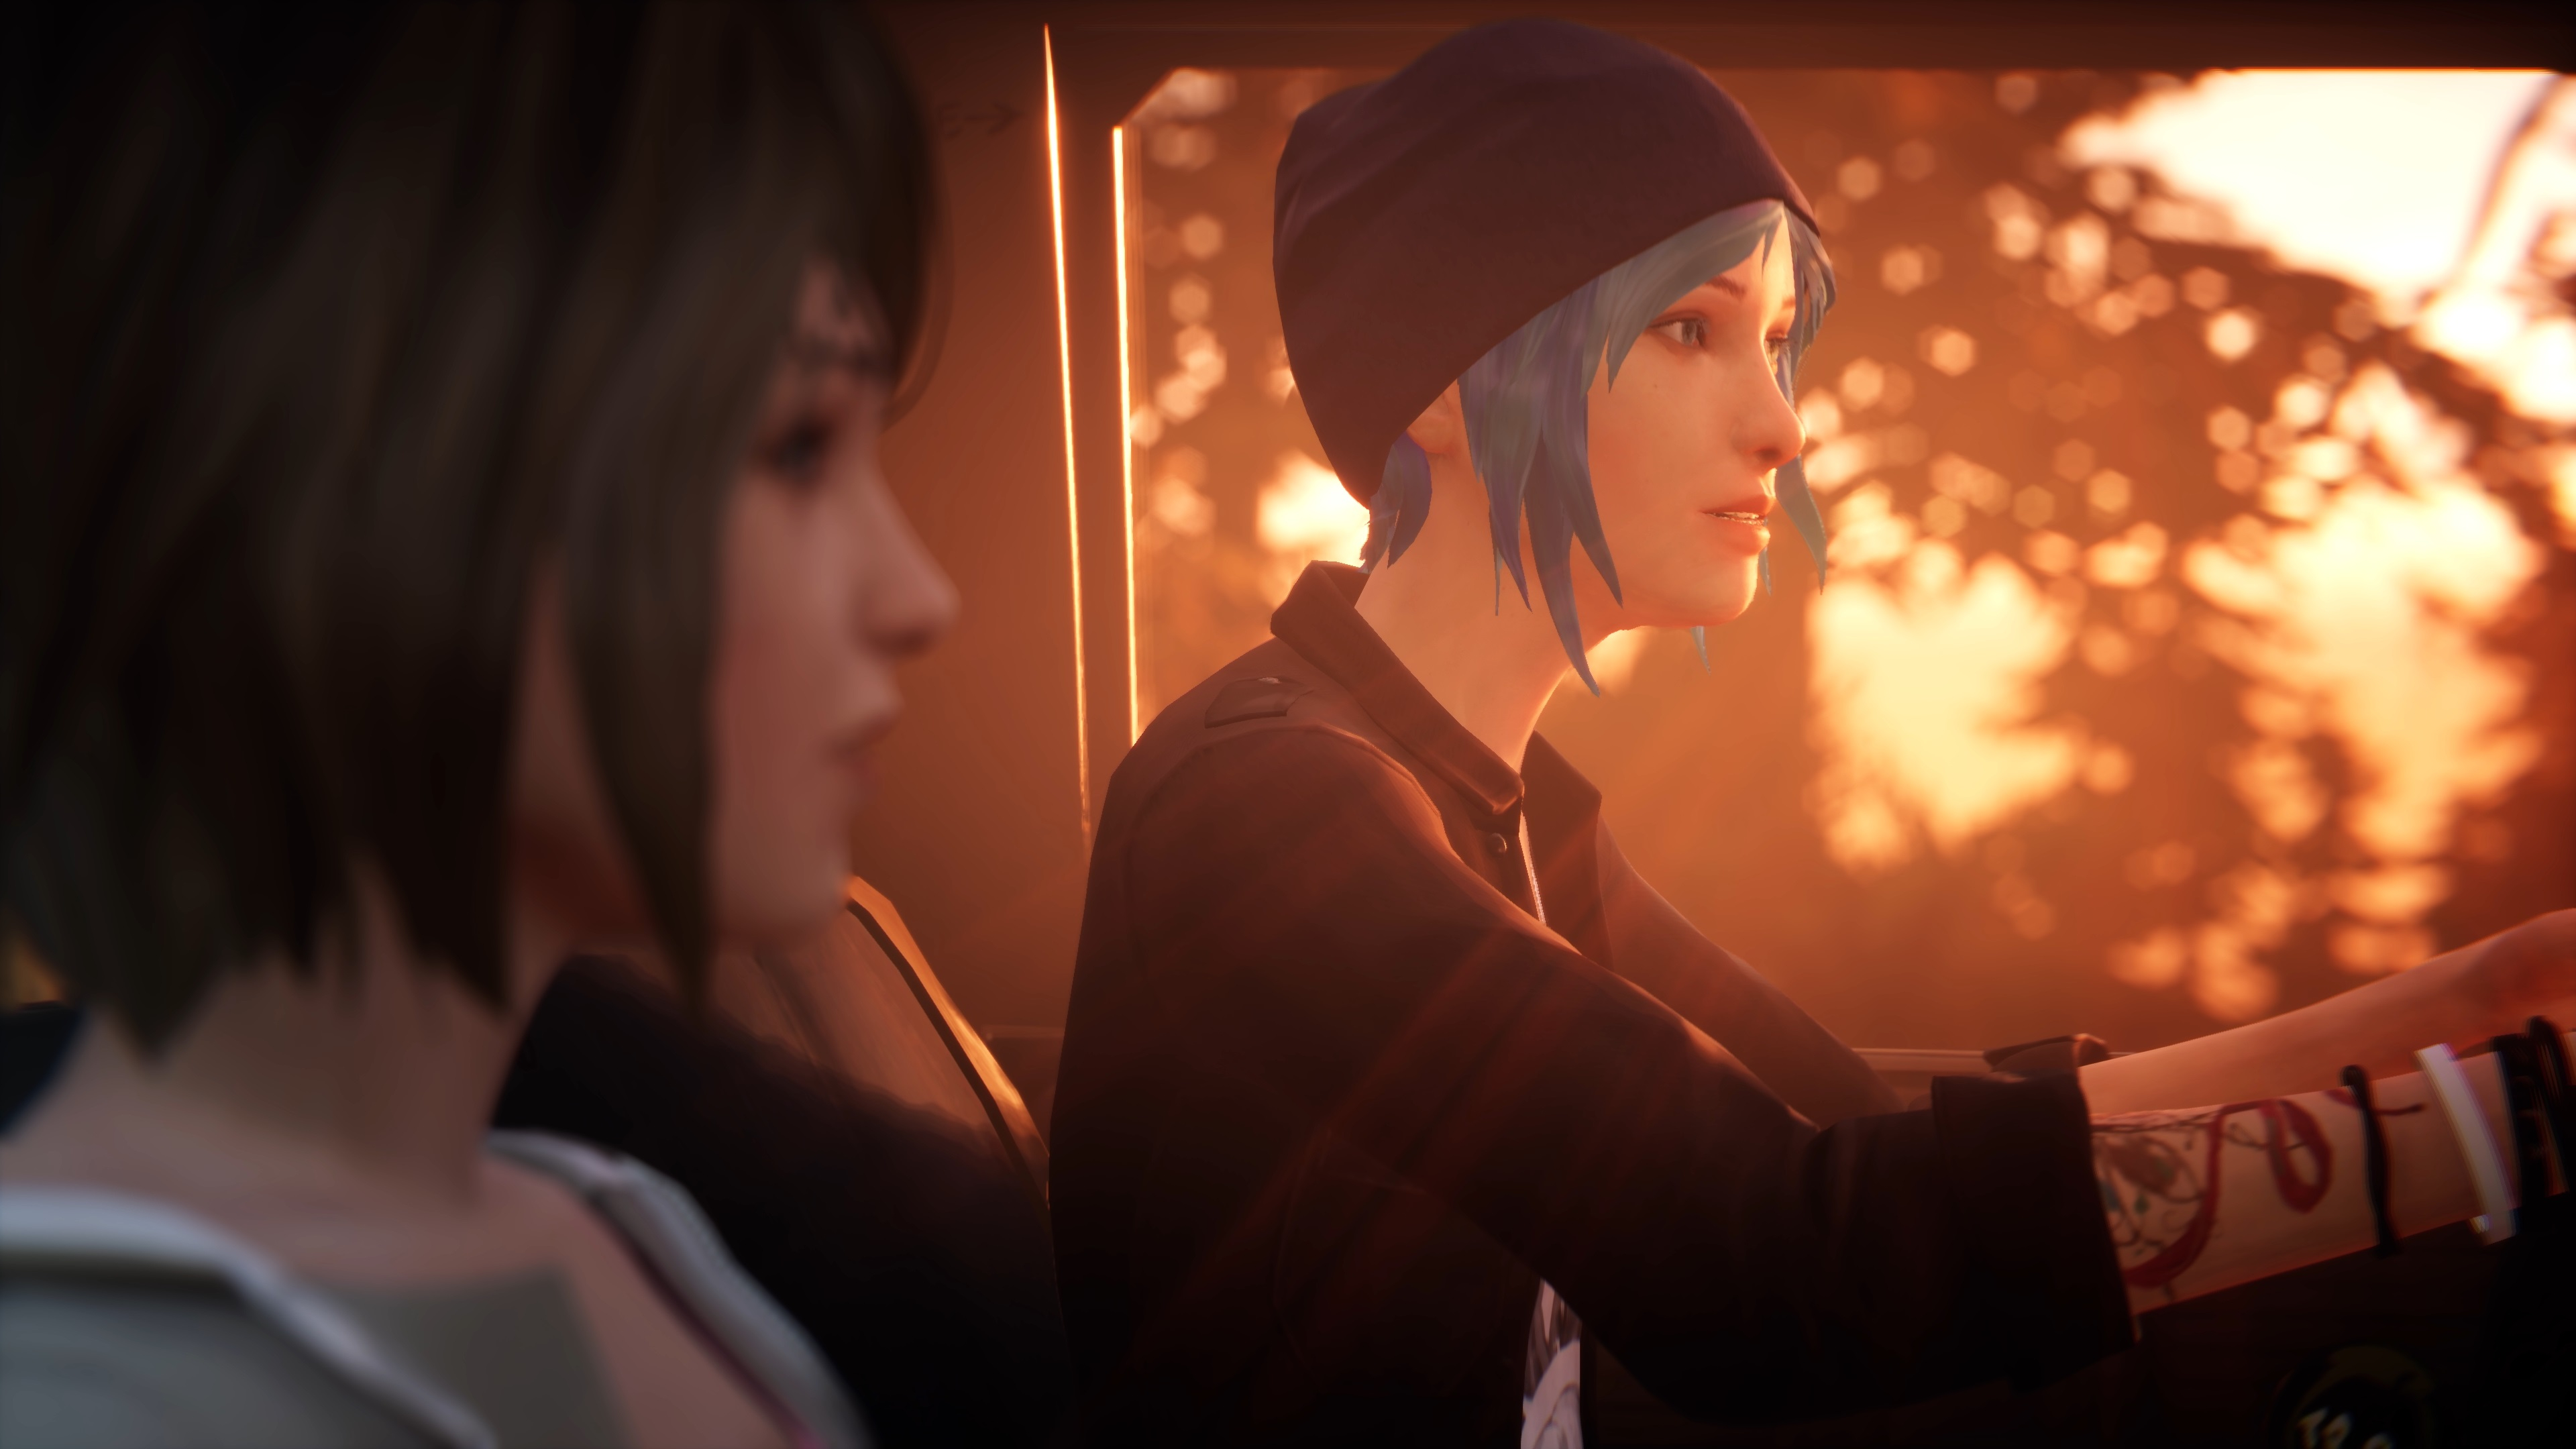 Life is strange ключ. Life is Strange Remastered collection. Life is Strange before the Storm ремастер. Life is Strange Remastered Макс. Life is Strange Remastered Arcadia Bay collection.